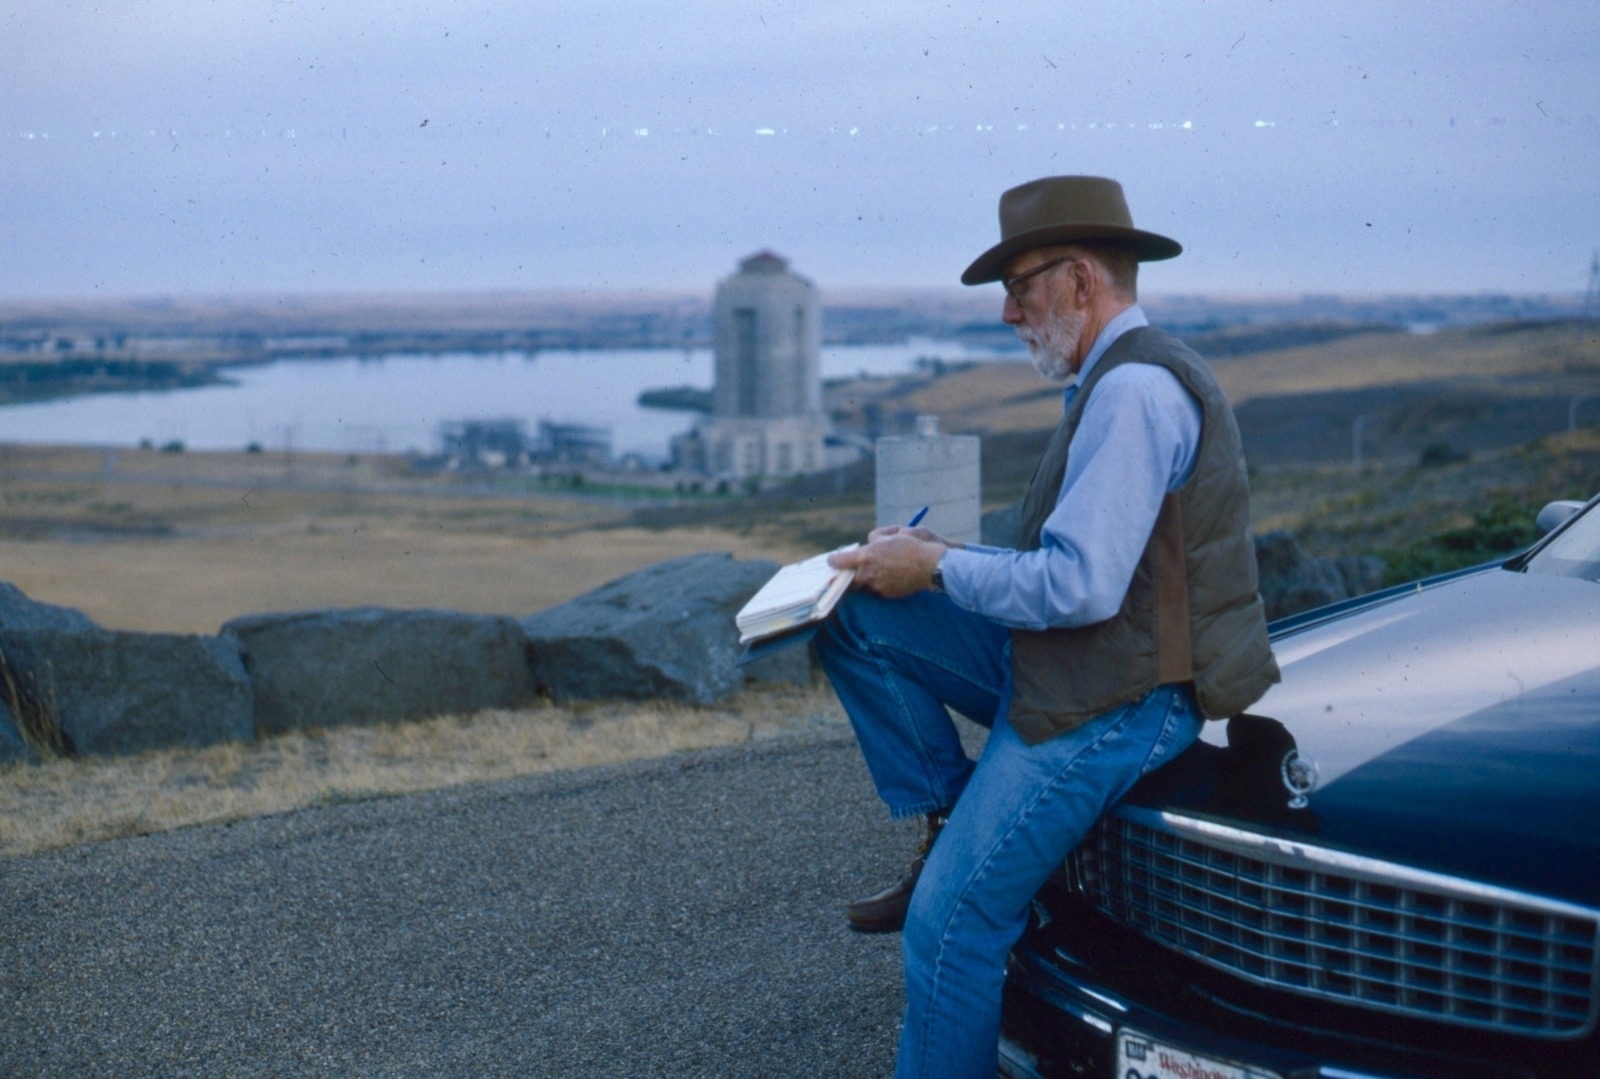 Ivan and Carol Doig spent many seasons traveling across Montana as he compiled new material for books which figured as the backdrop for his stories. Here he is taking notes and making observations at Fort Peck, created by the Missouri River in northeastern Montana. Photo courtesy Carol Doig/MSU Library Doig Archives